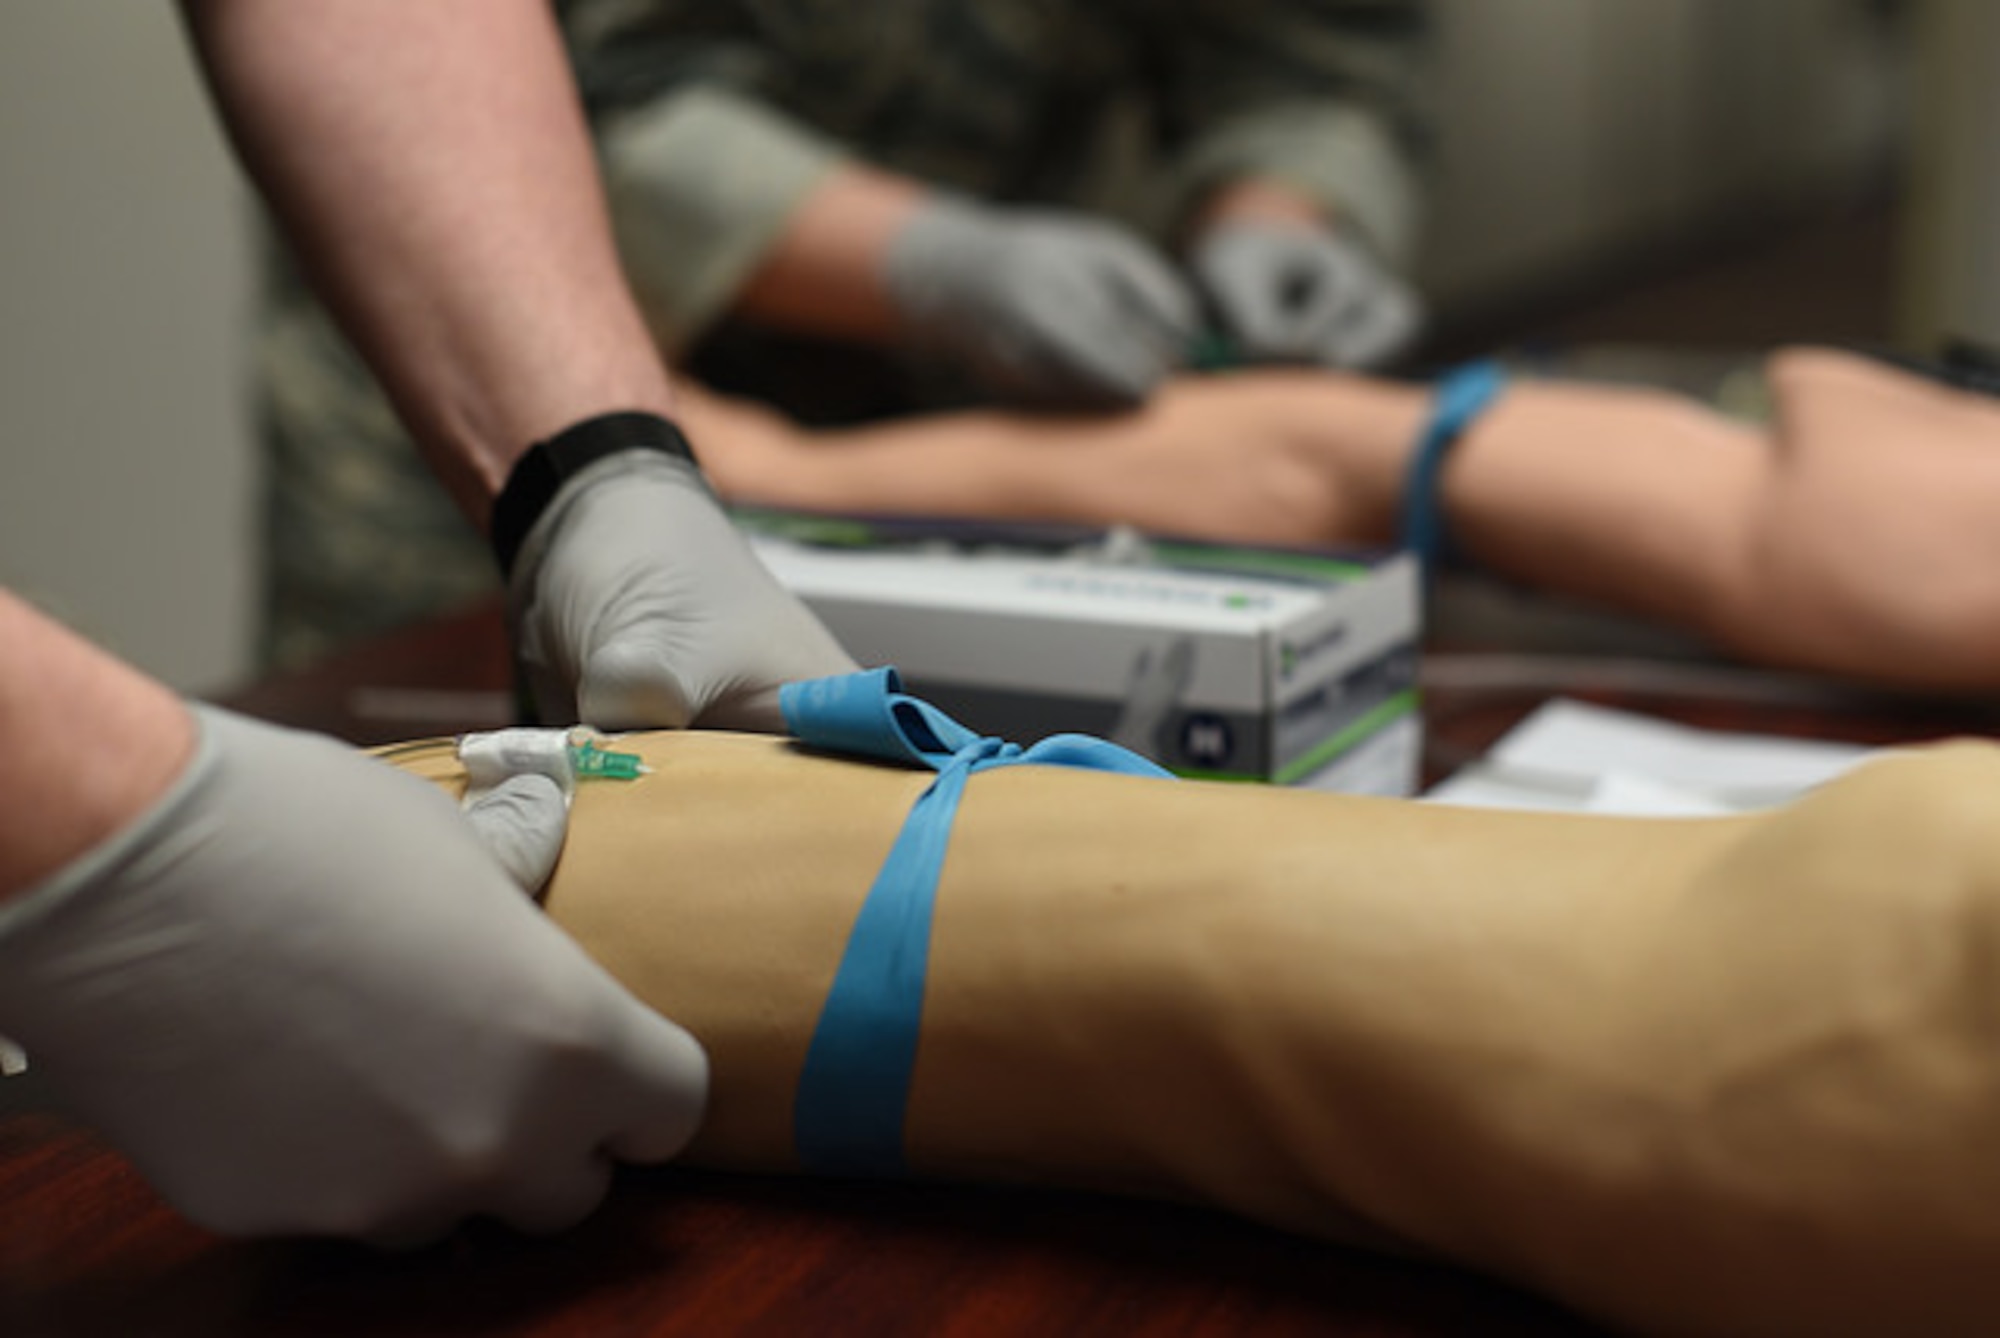 An Airman from the 87th Medical Group places an IV in a multi-venous IV training arm during an IV contest at Joint Base McGuire-Dix-Lakehurst, N.J., May 8, 2018. The IV contest was part of a series of events during nurse's week to challenge the skills of the medical staff and show appreciation for nurses. (U.S. Air Force photo by Airman Ariel Owings)